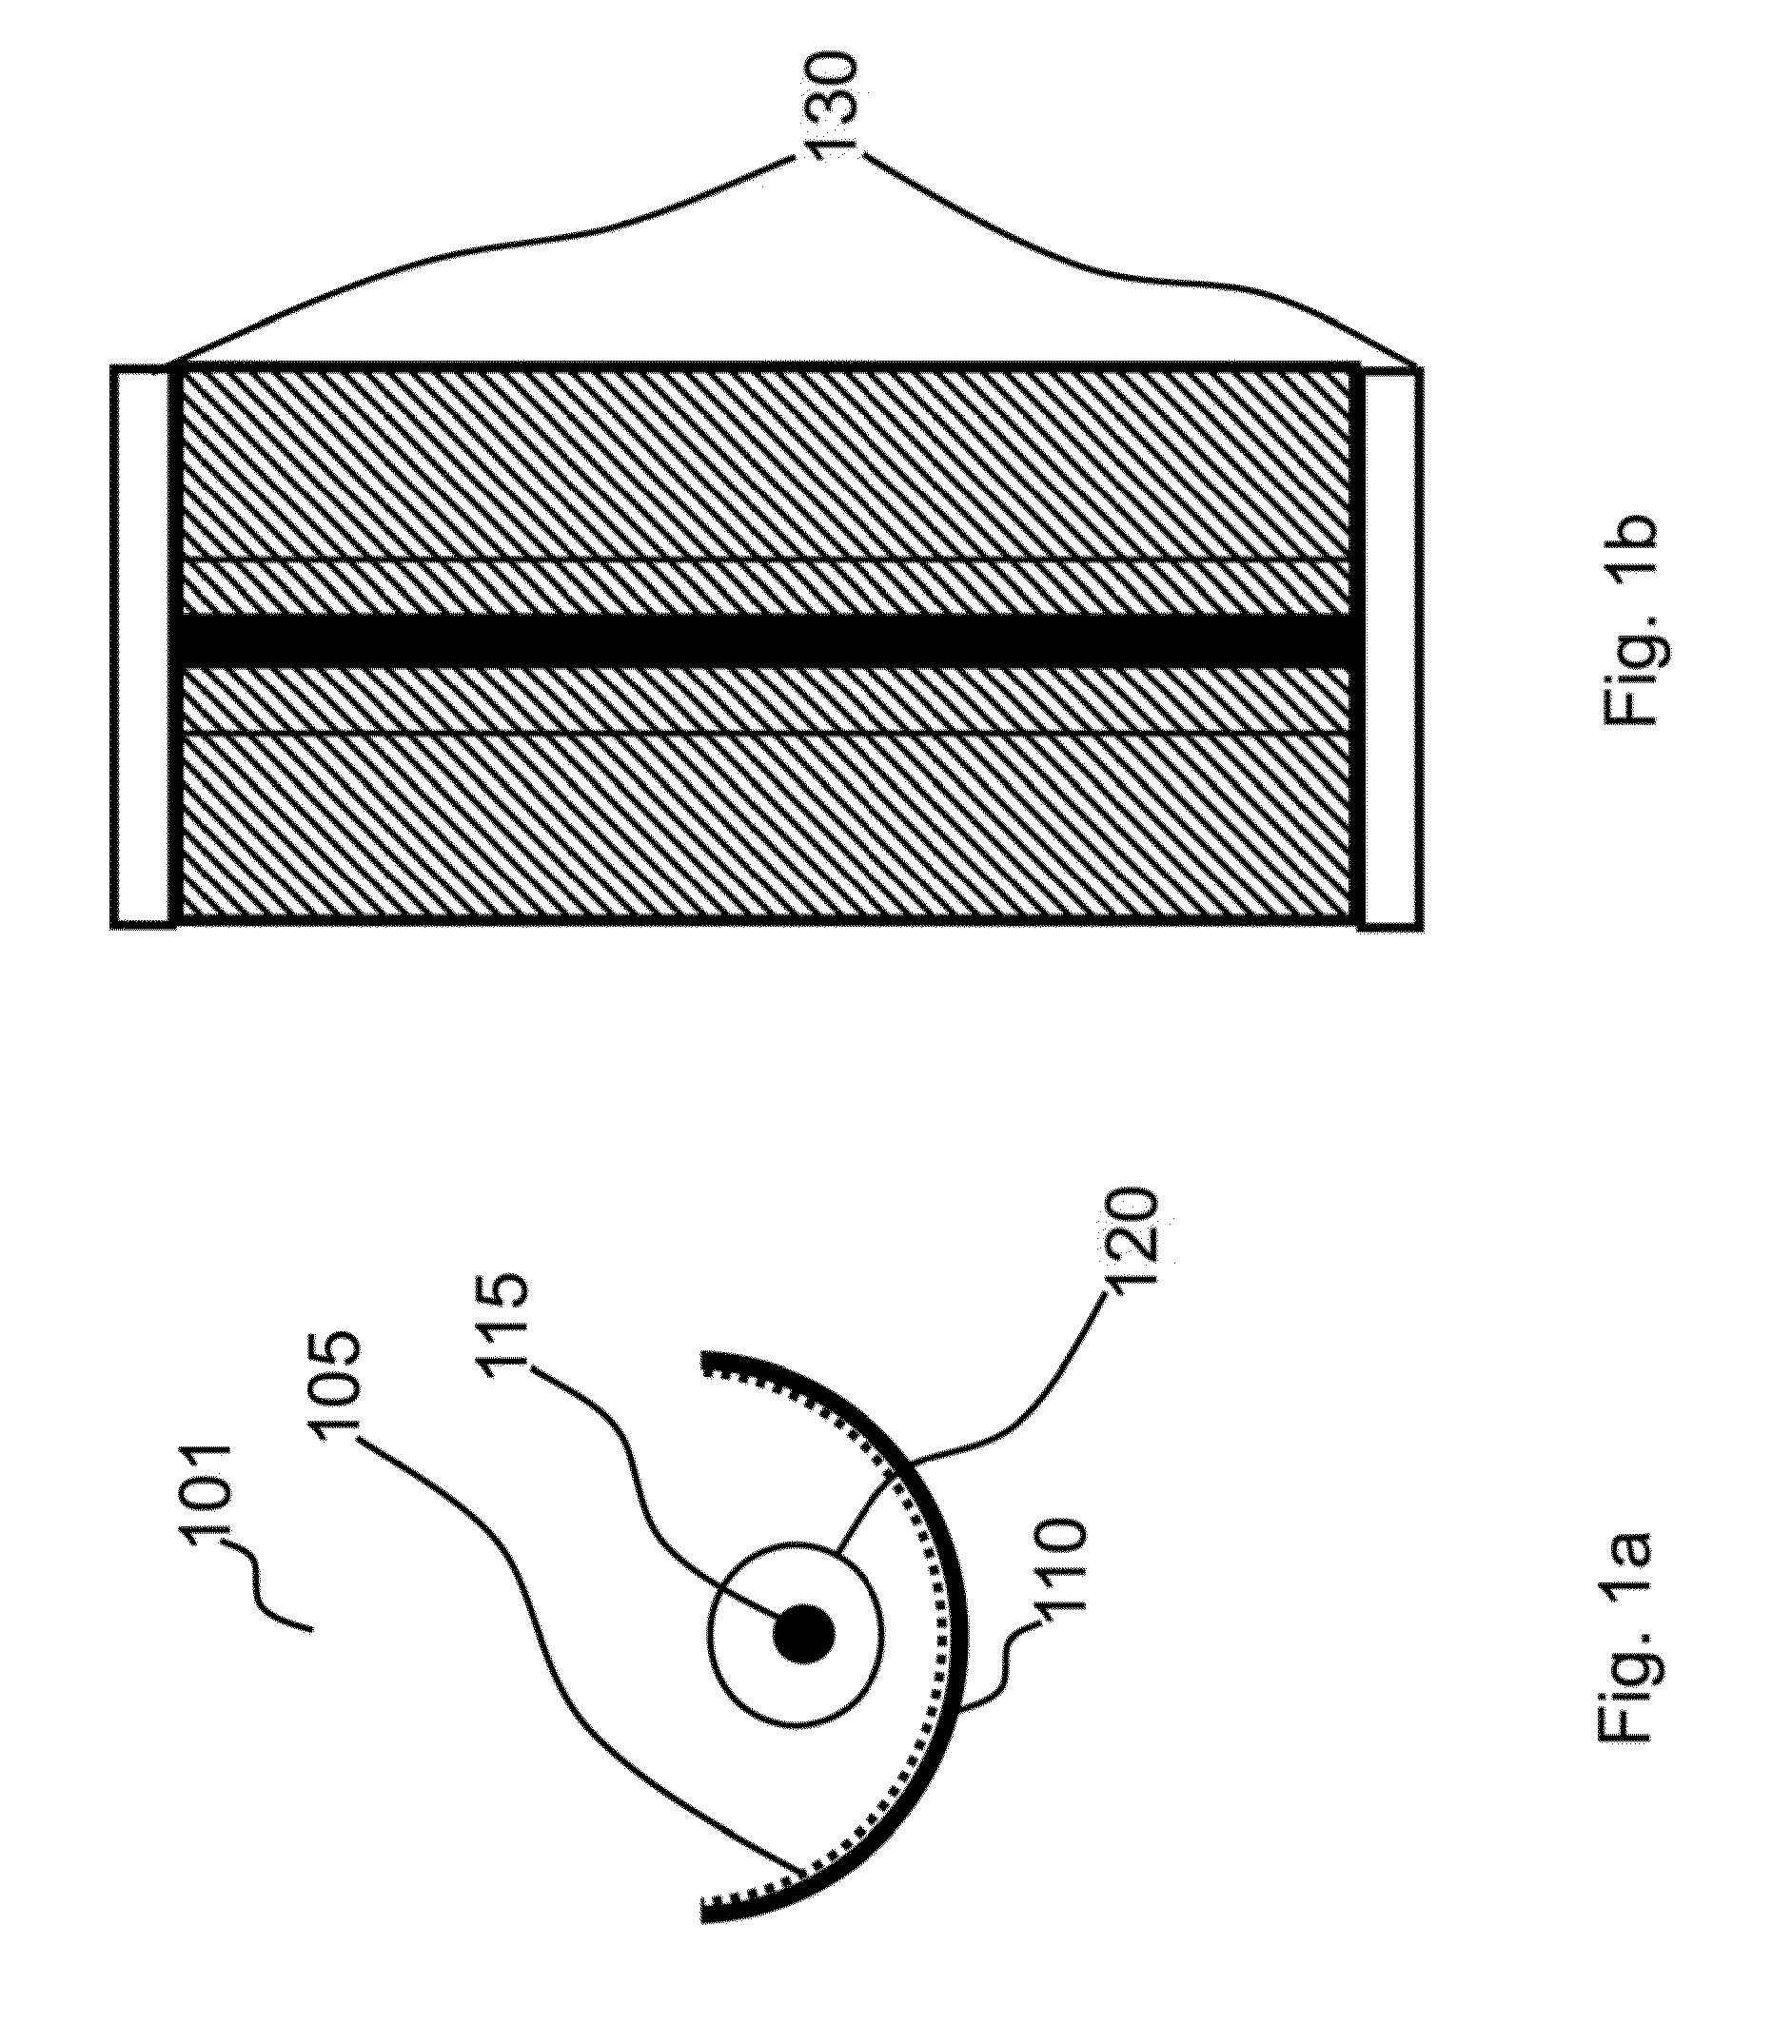 Tracking system for lightweight solar collector assembly and array